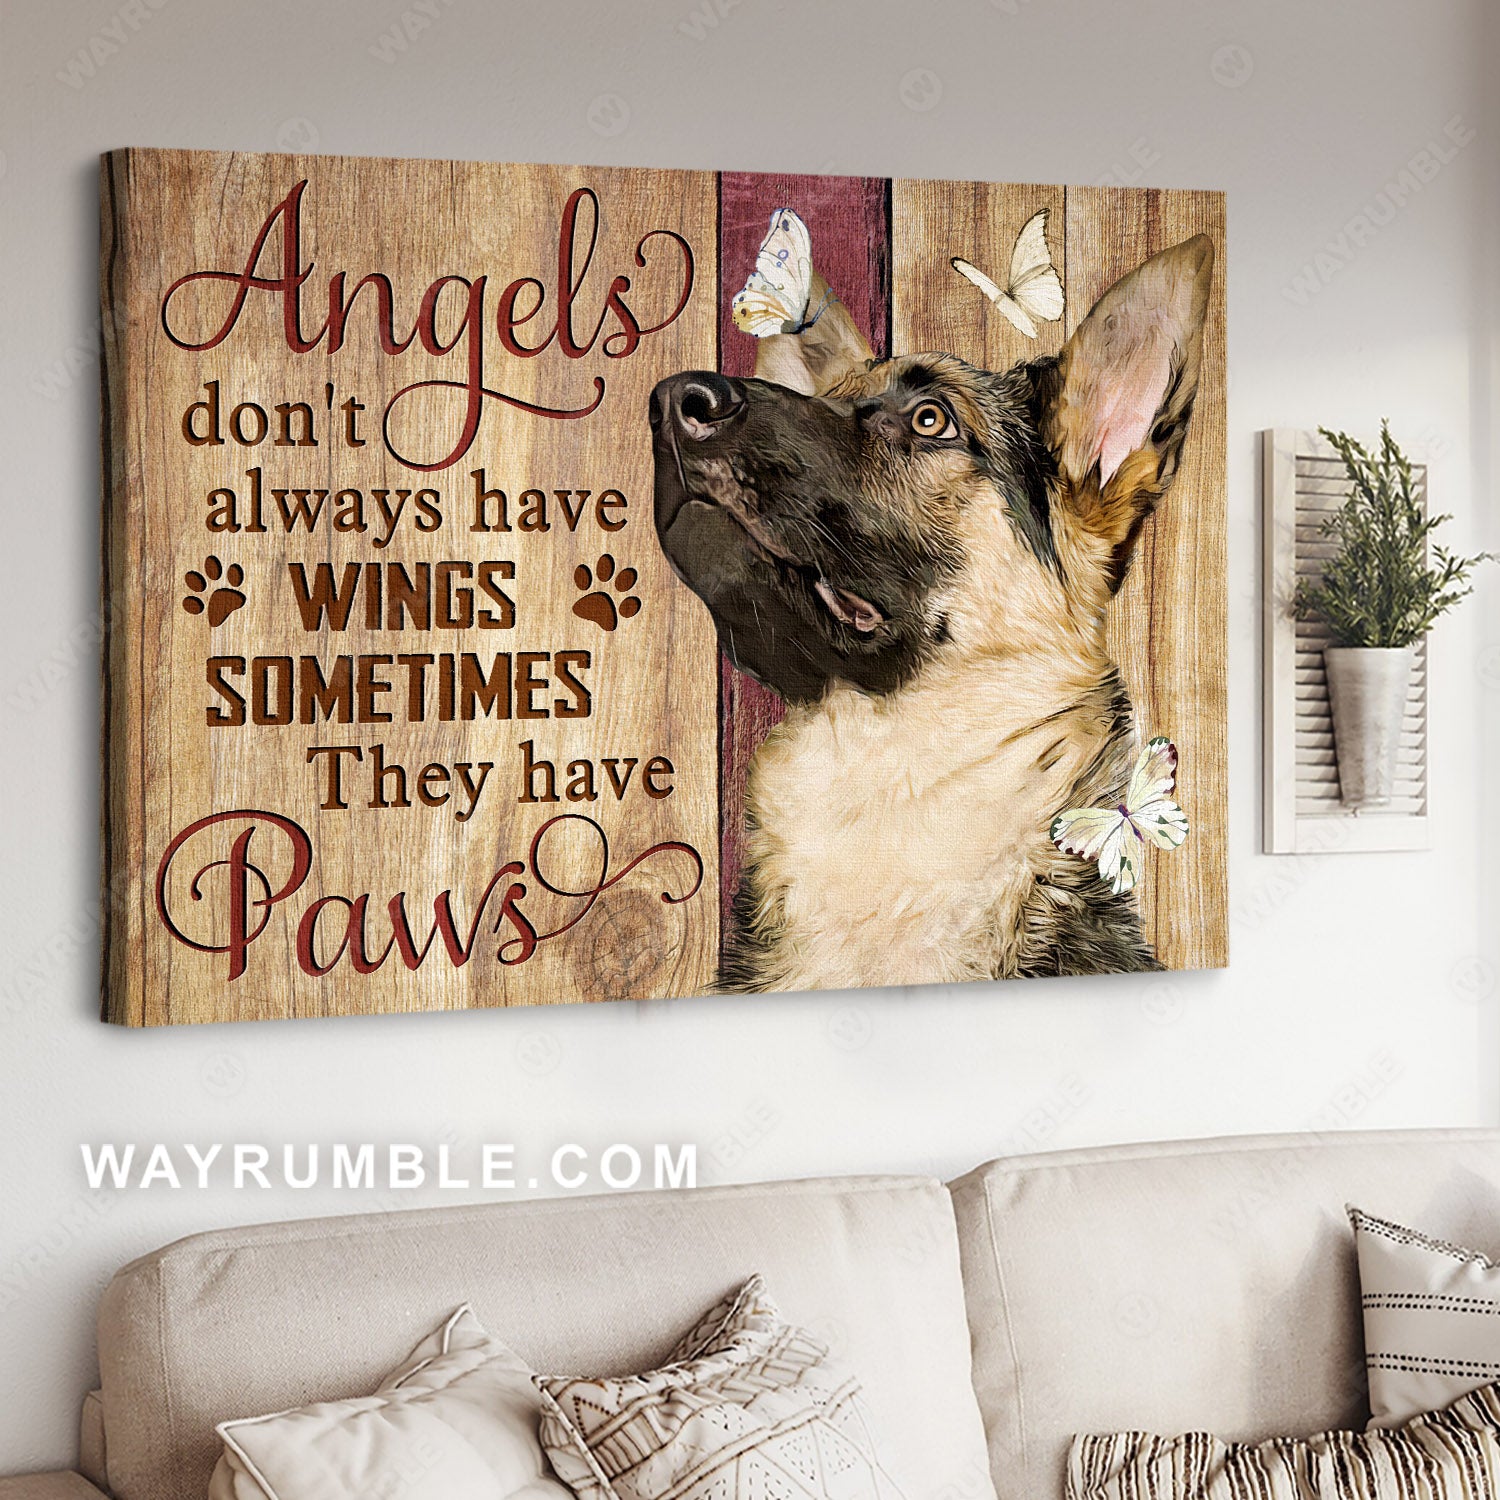 German Shepherd, Guard dog, White butterfly, Angels don't always have wings - Jesus Landscape Canvas Prints, Home Decor Wall Art